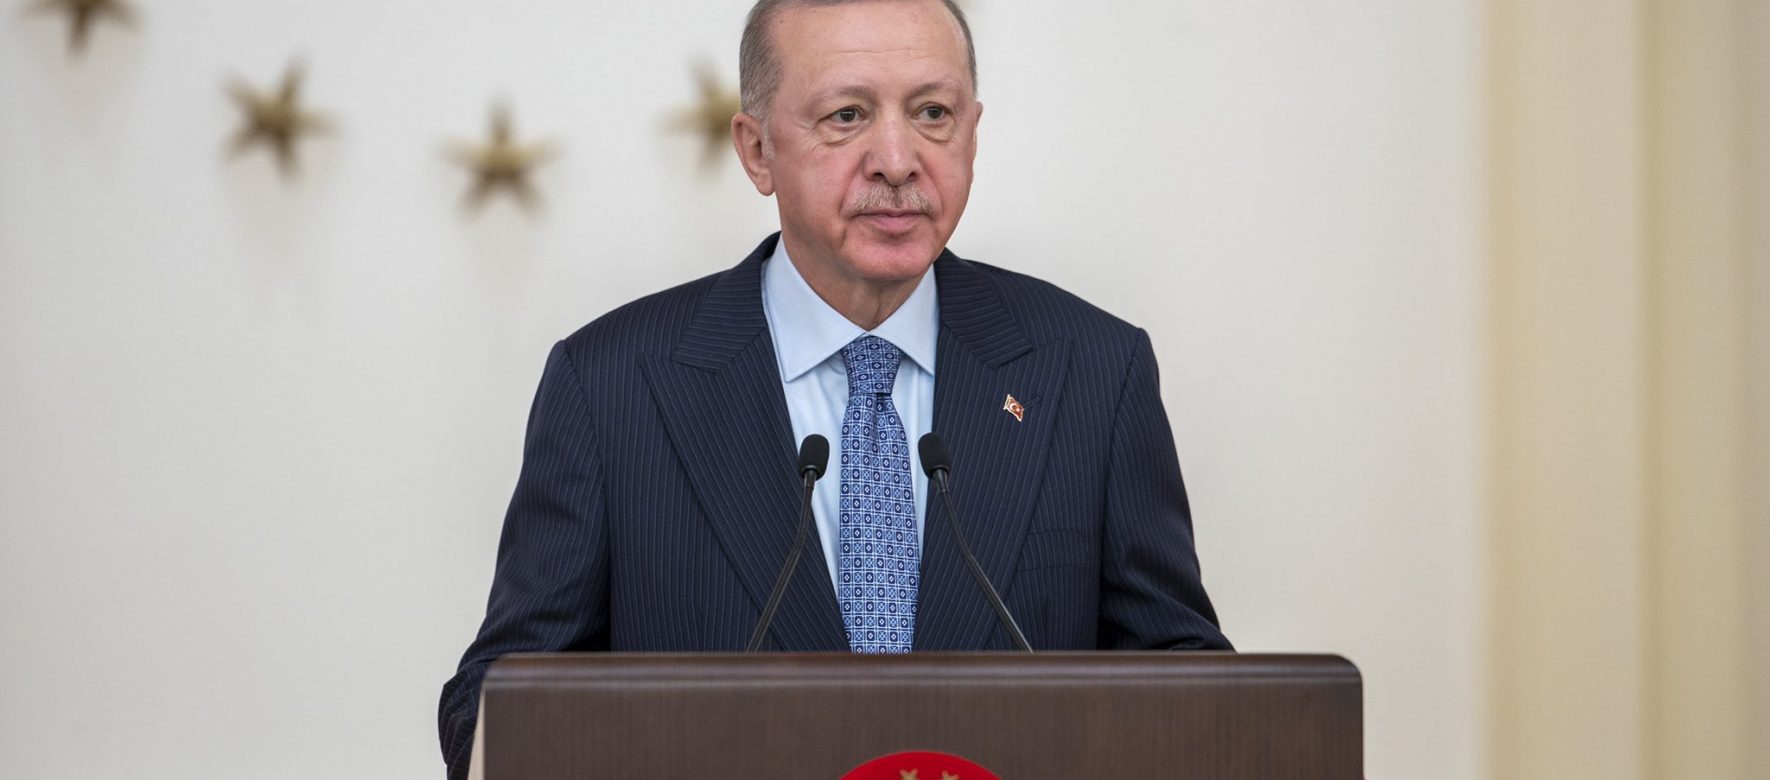 Turkey: The Turkish President wants to achieve the economic objectives that his party has set for 2023